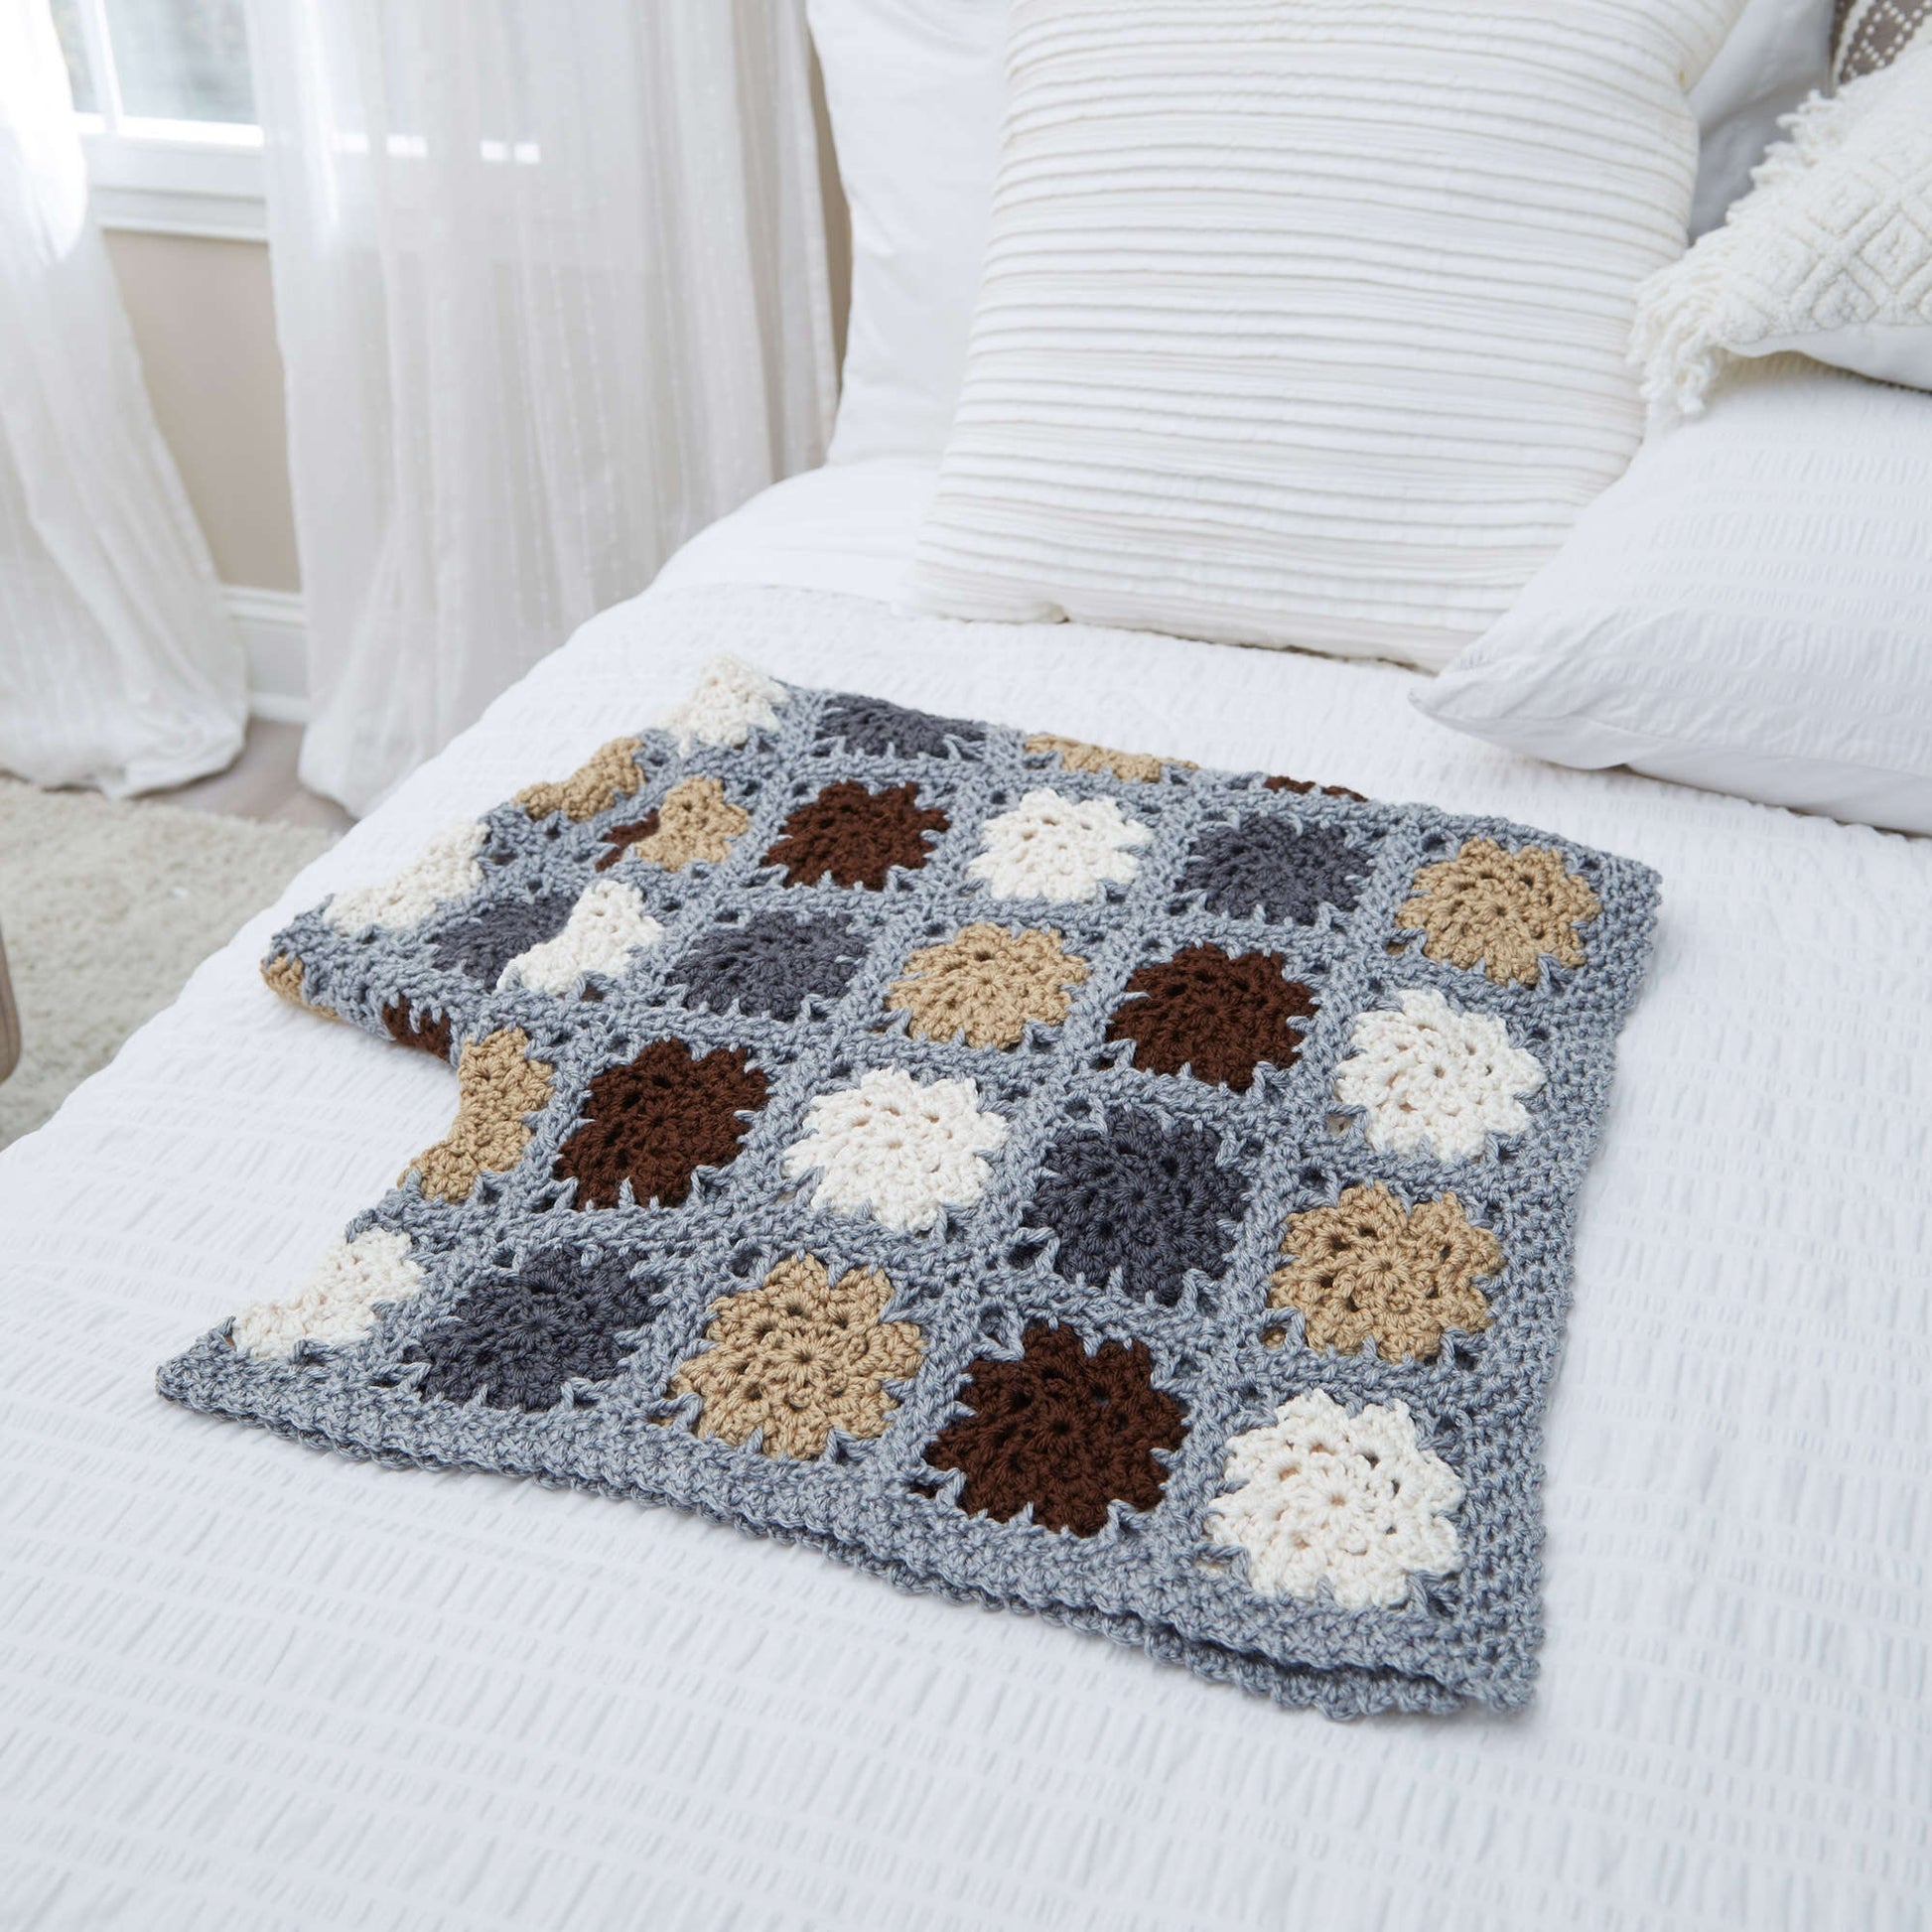 Free Red Heart Neutrality Throw Pattern